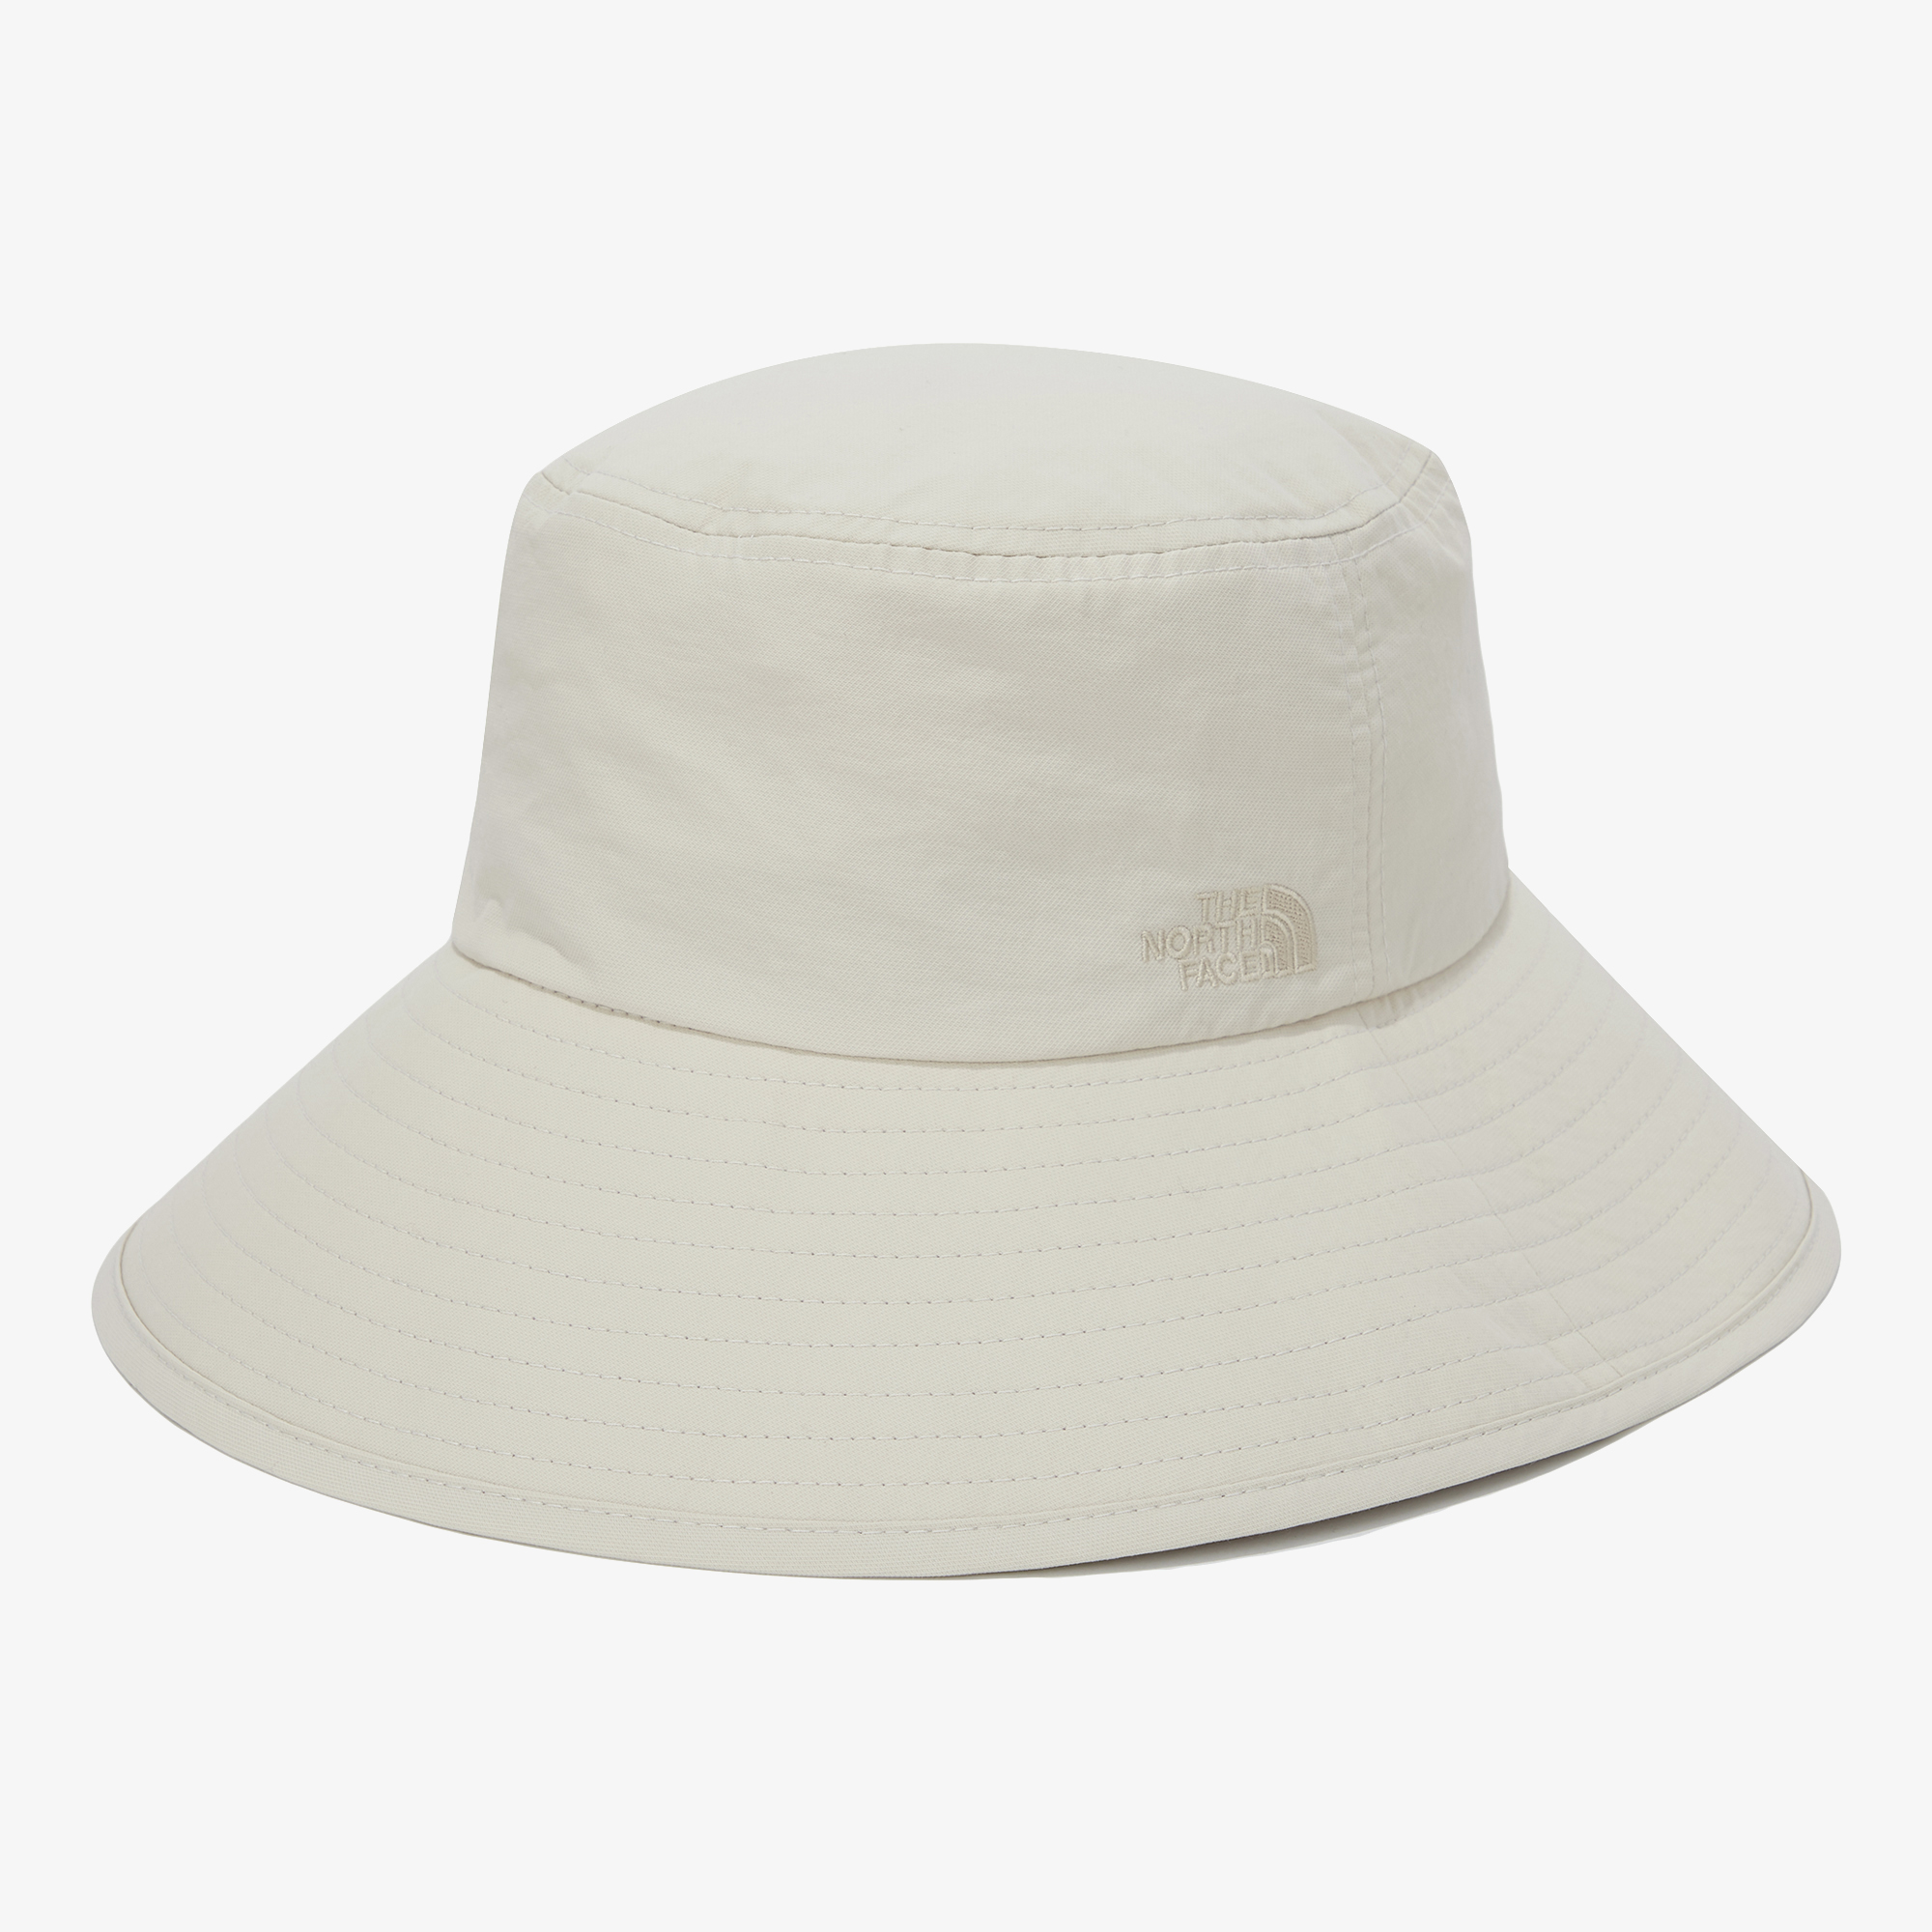 THE NORTH FACE-W’S WIDE HAT